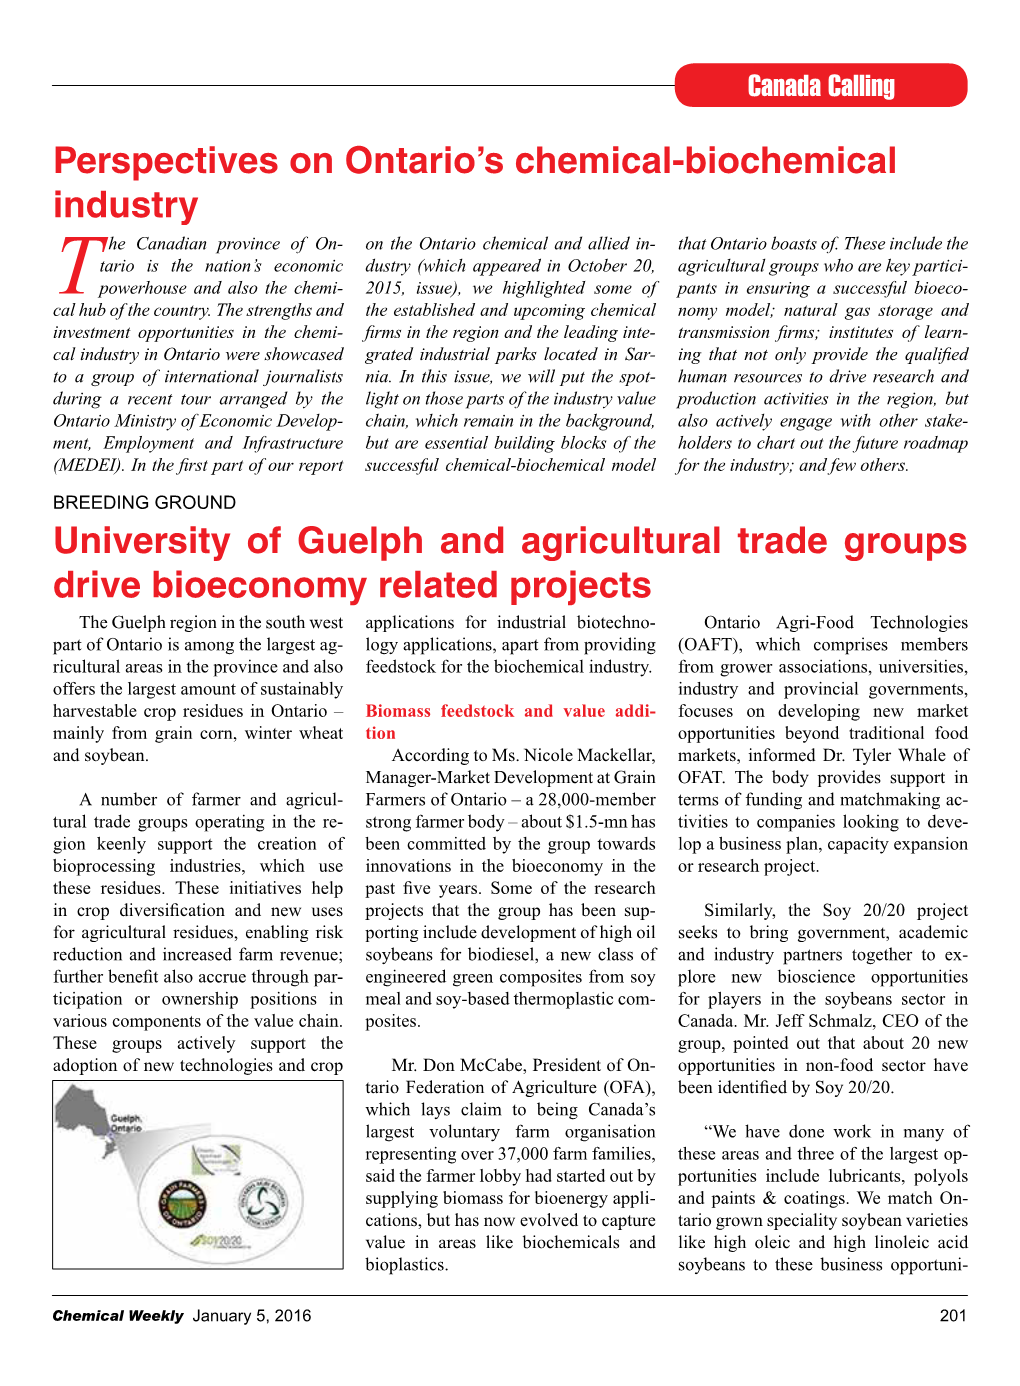 Perspectives on Ontario's Chemical-Biochemical Industry University of Guelph and Agricultural Trade Groups Drive Bioeconomy Re